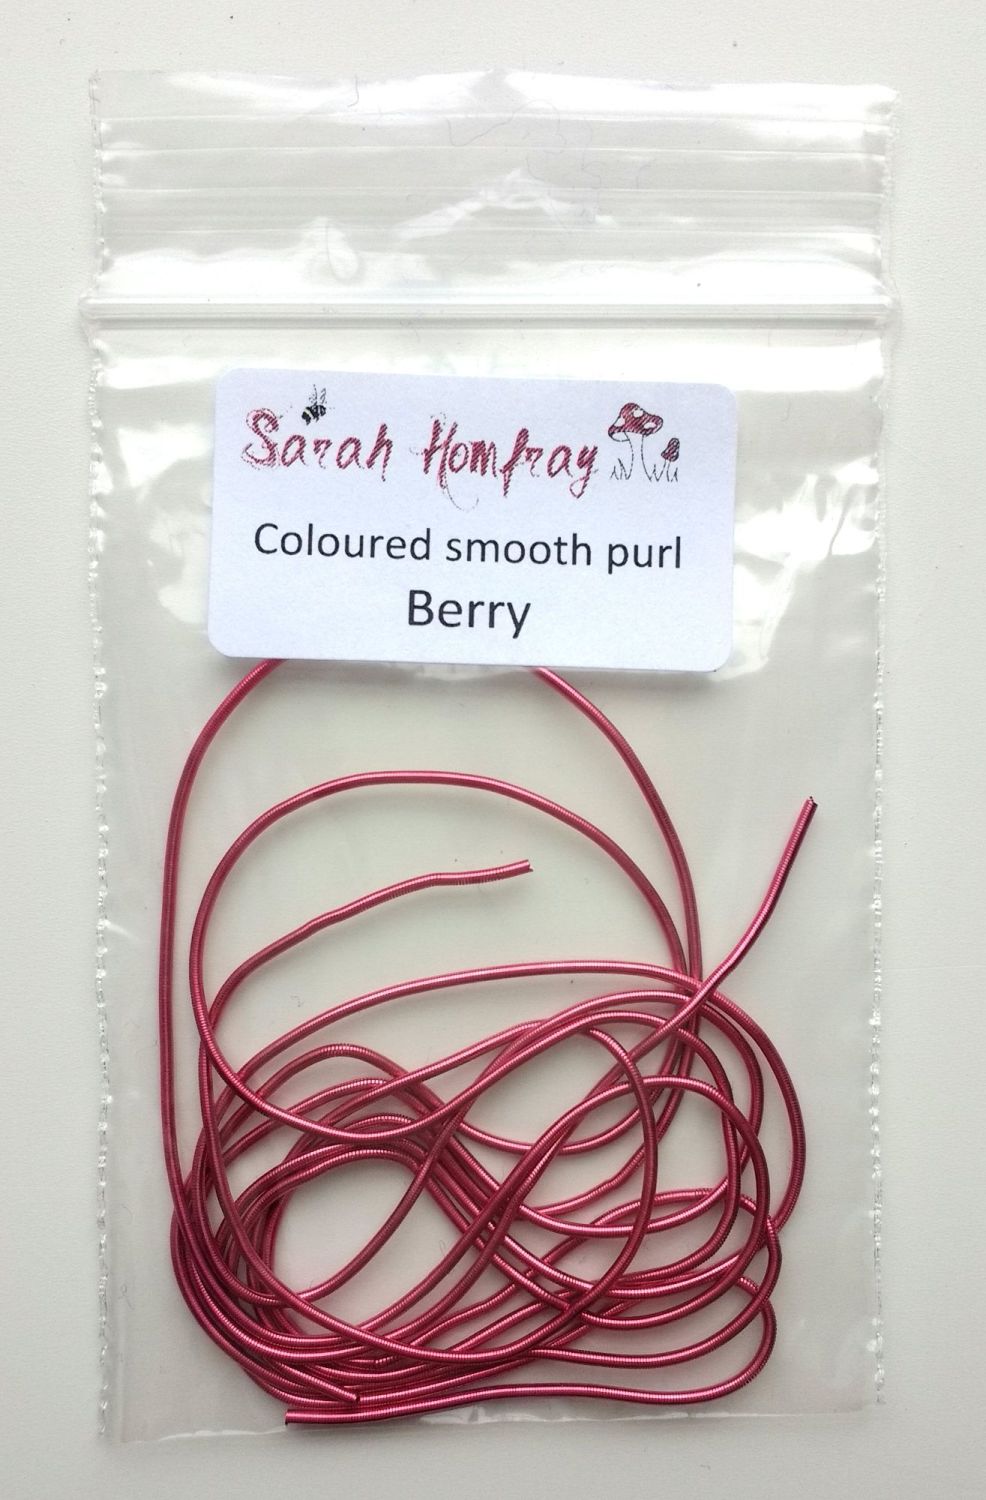 NEW! Coloured smooth purl no.6 - Berry